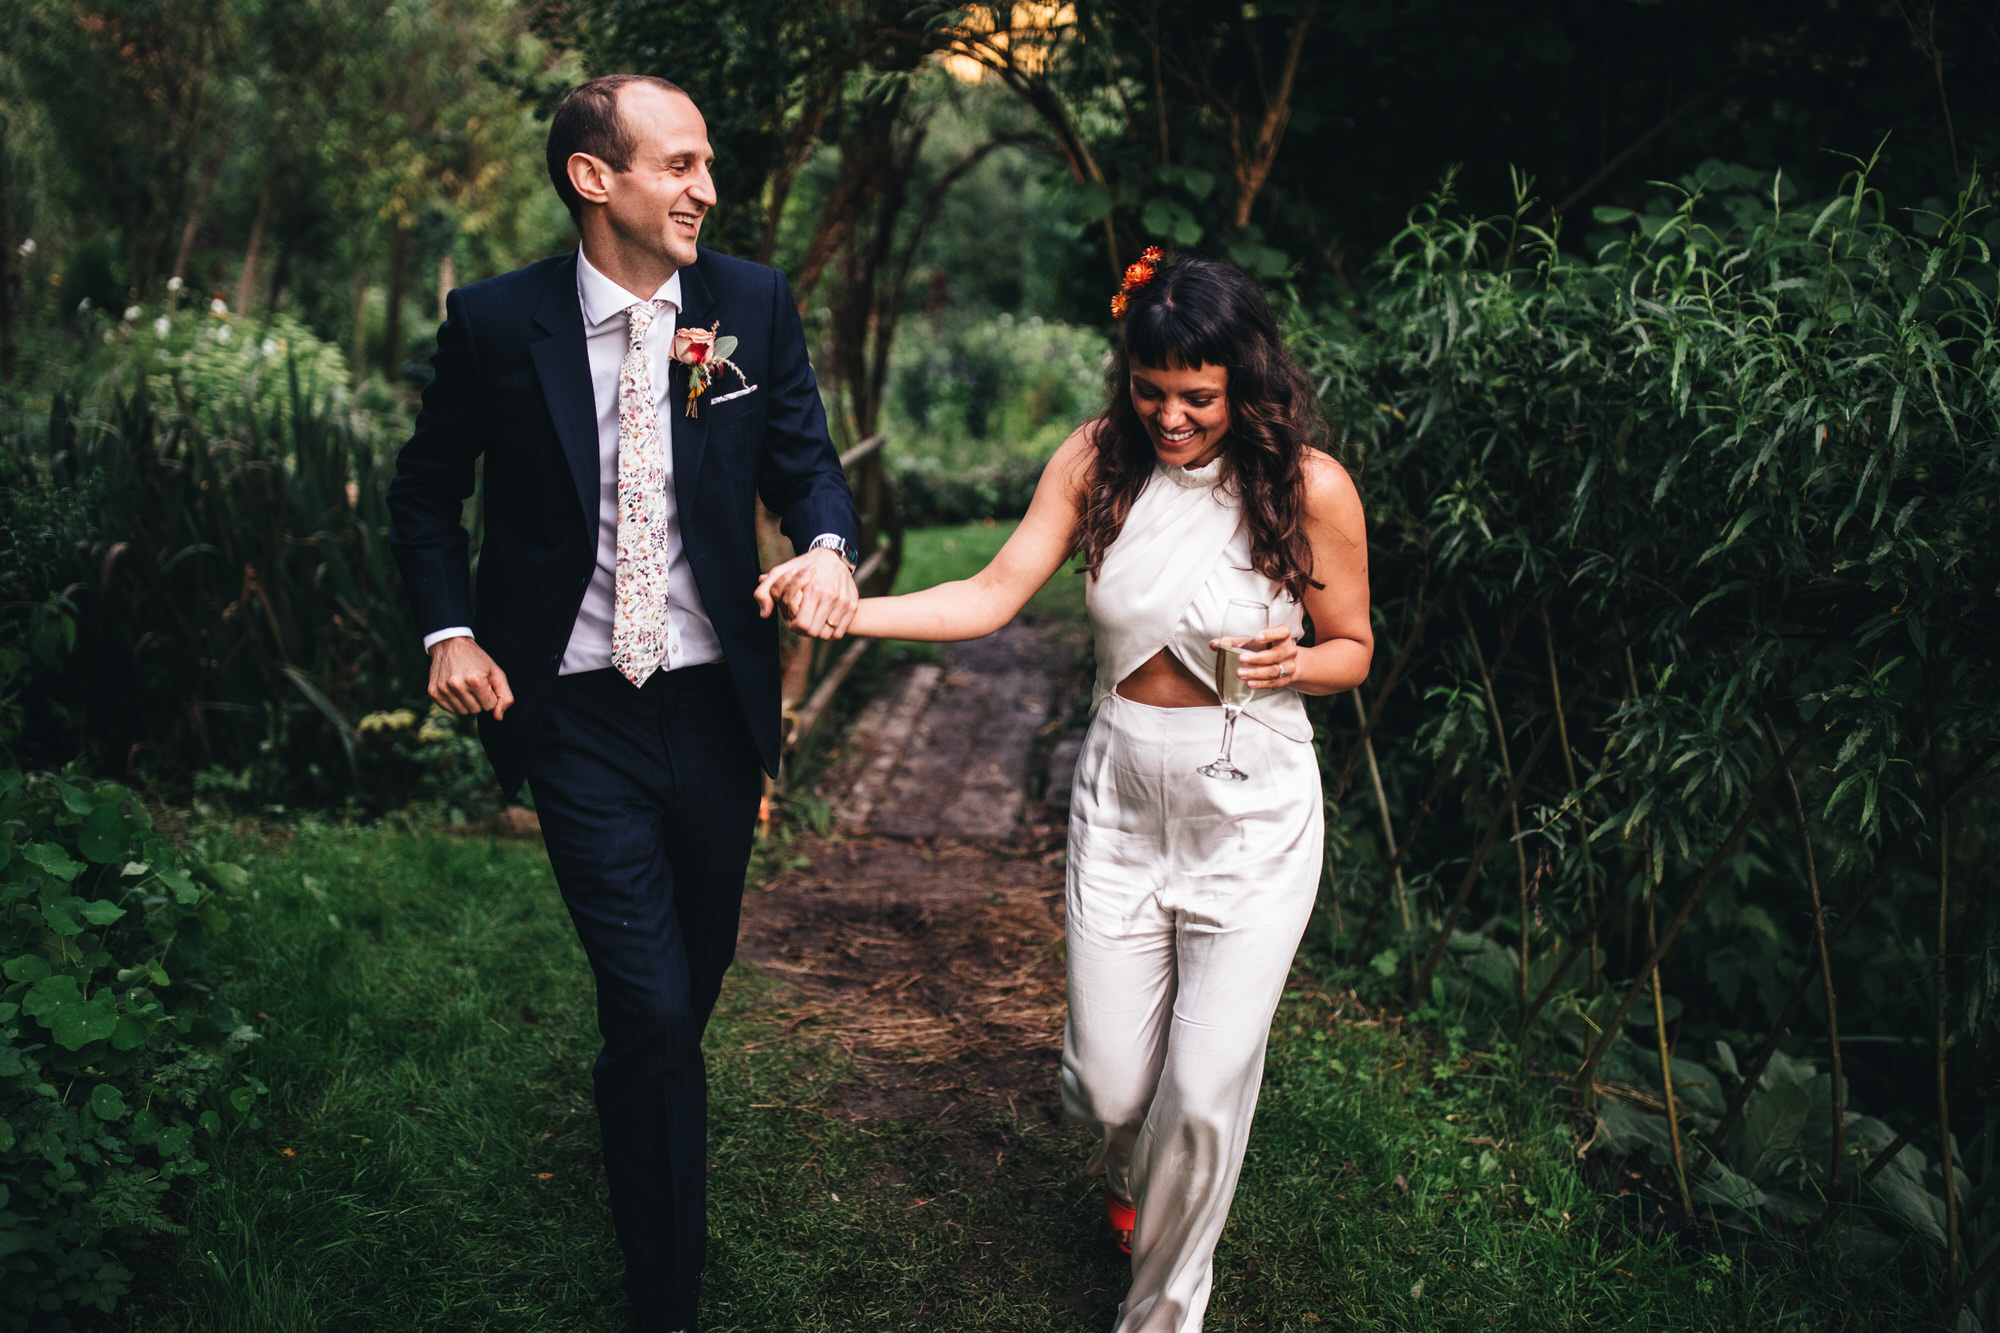 bride and groom walking together through trees, laughing